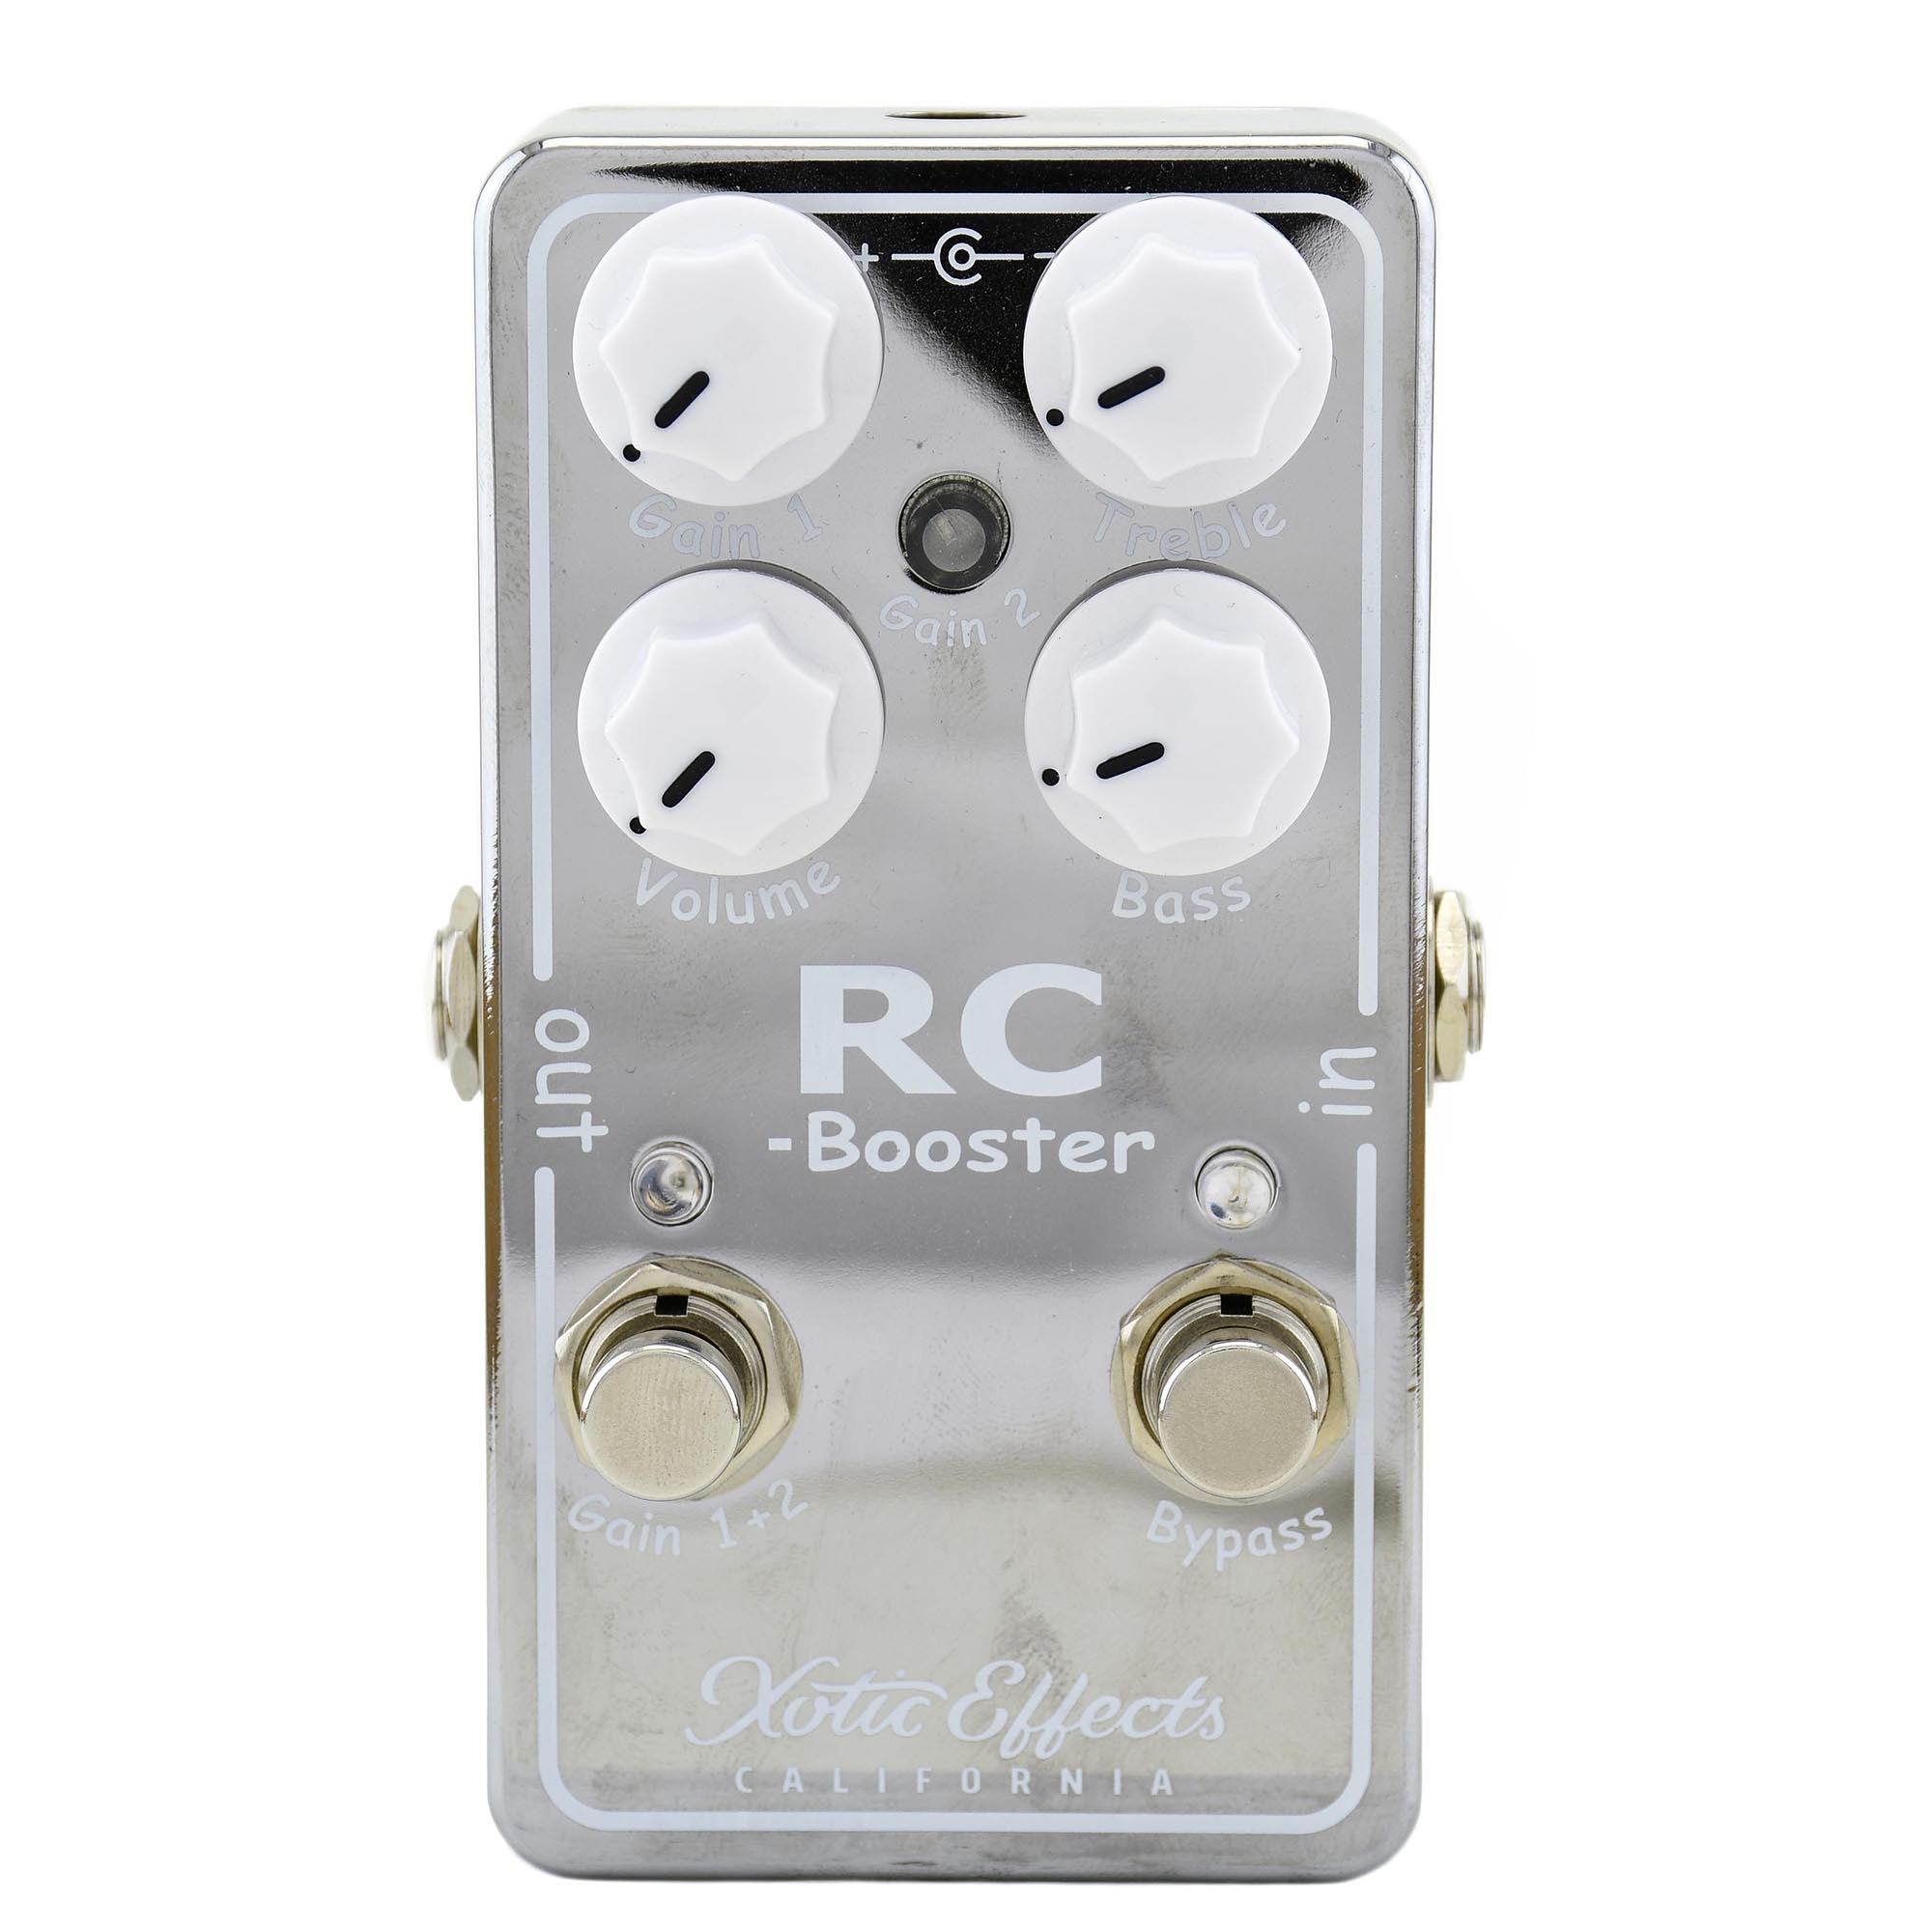 Xotic Rc Booster Guitar Boost Pedal   Version 2